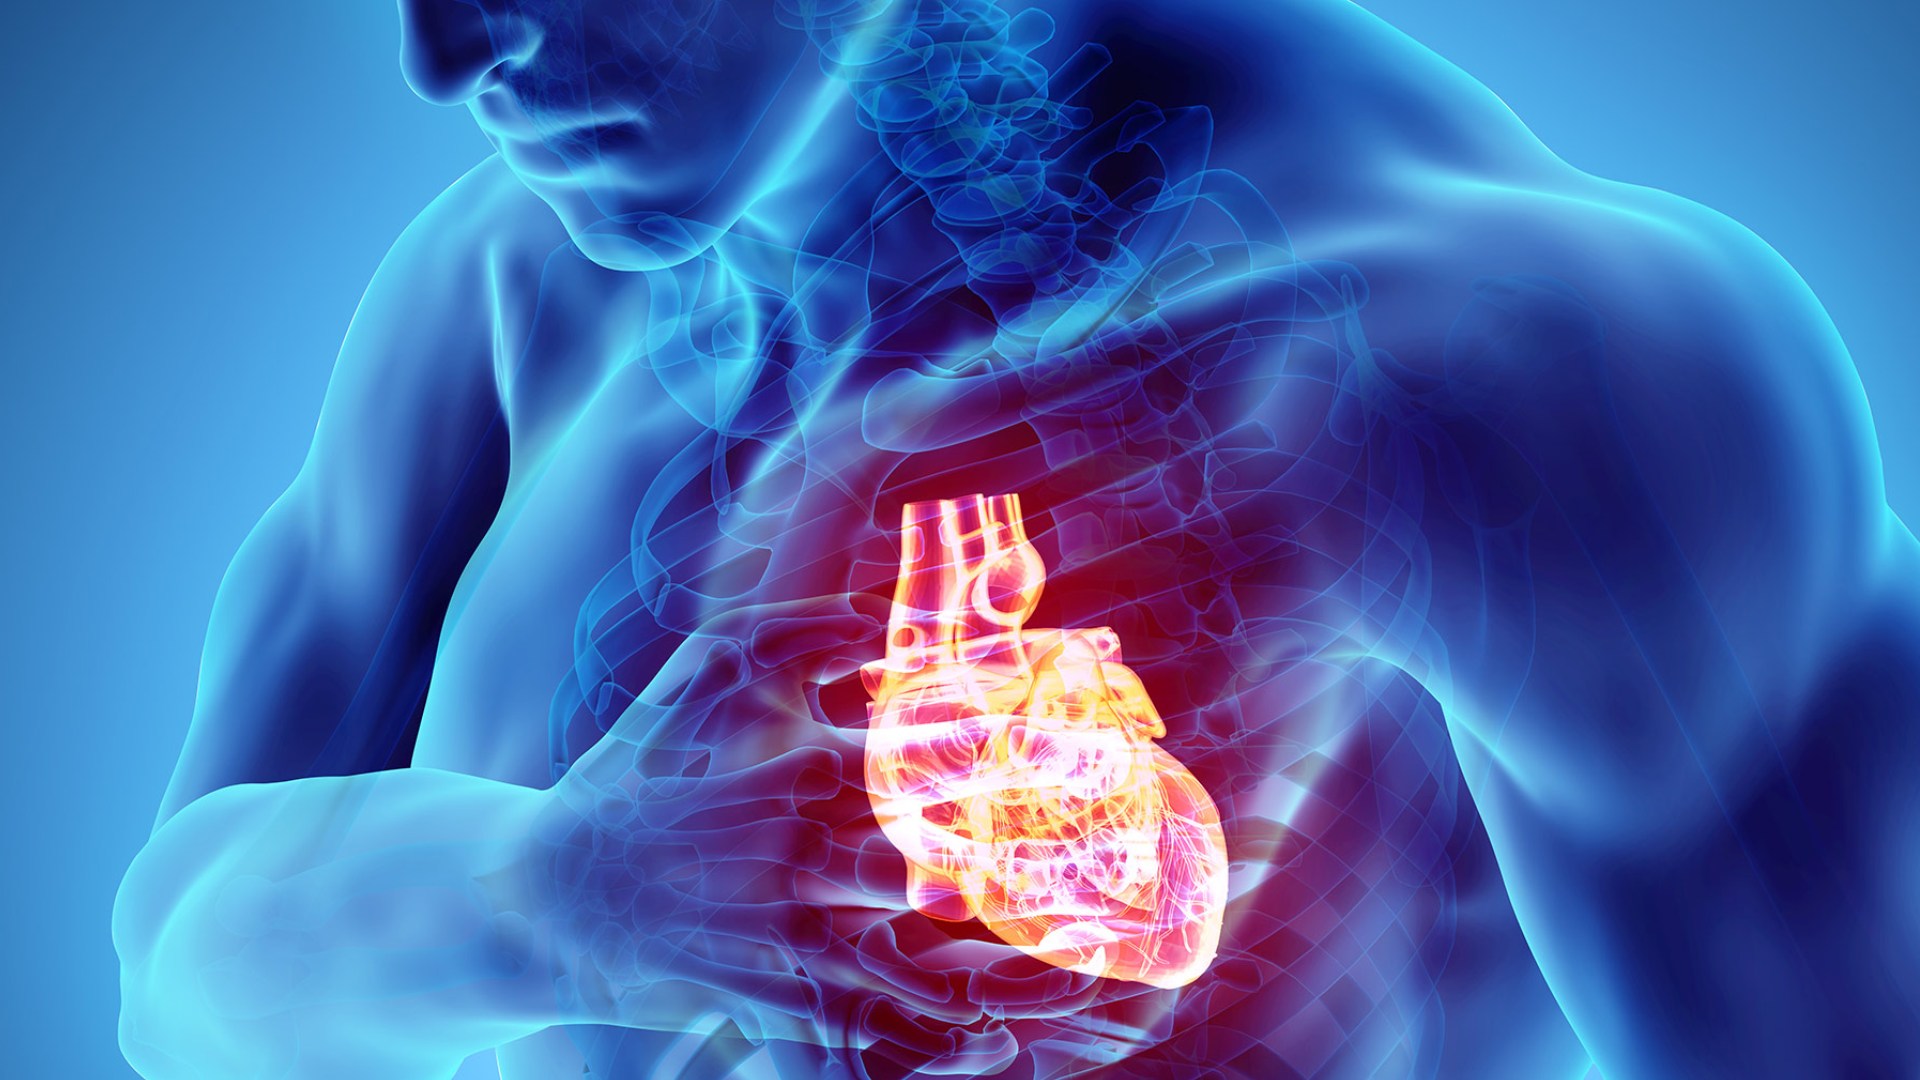 COVID-19 Triggers Cardiac Arrest In Some Patients